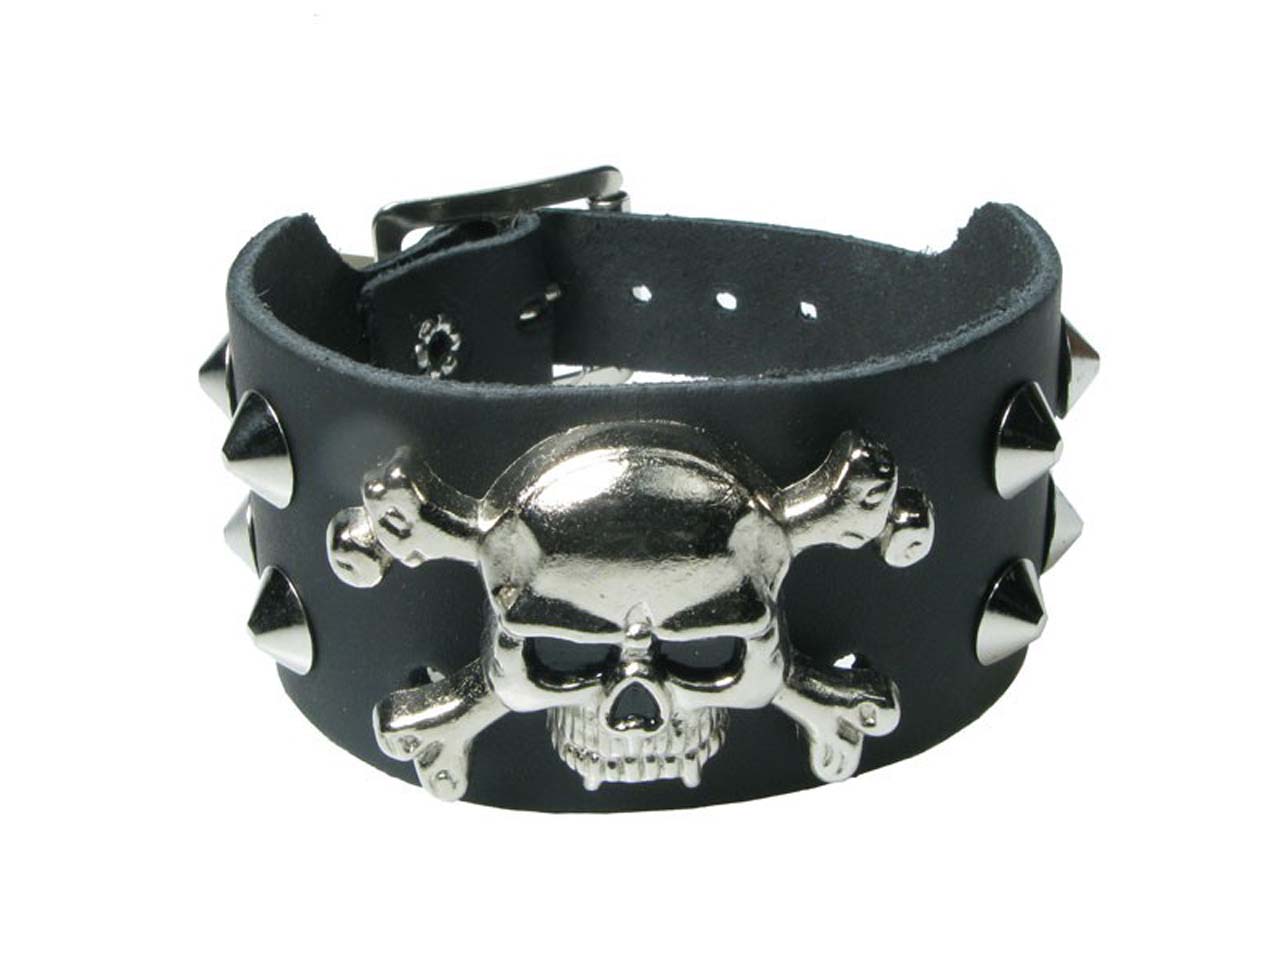 2 Row Conical Skull Crossbones Studded Leather Wristband Gauntlet Bullet 69